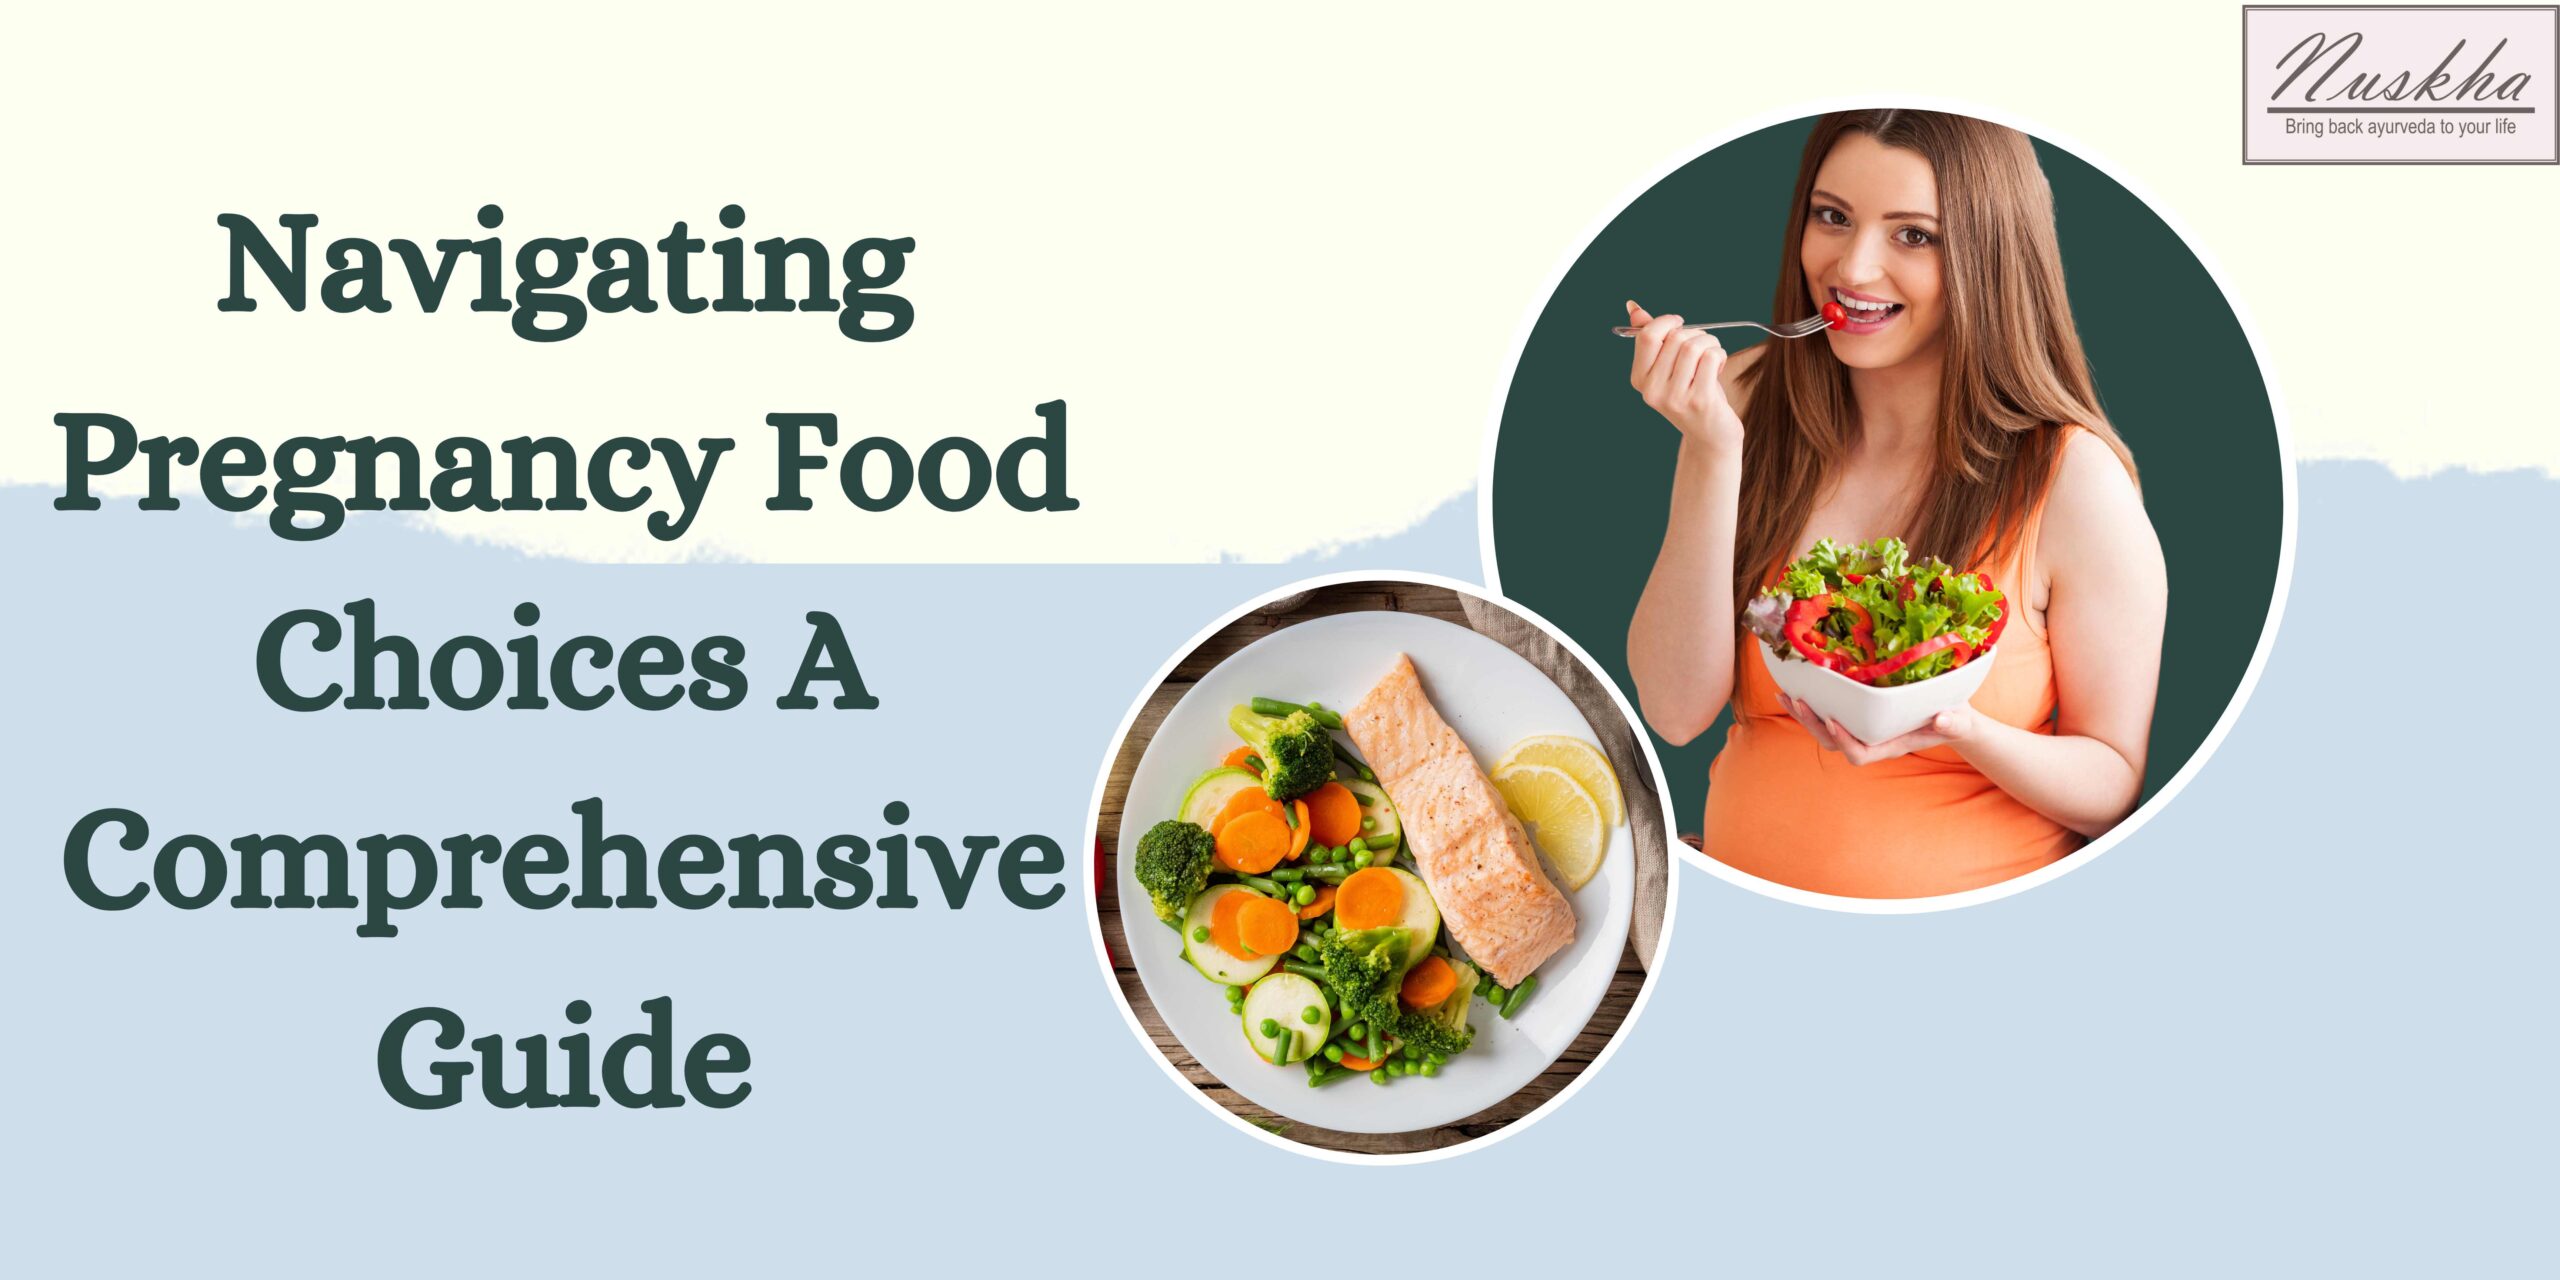 Navigating Pregnancy Food Choices A Comprehensive Guide by nuskha kitchen